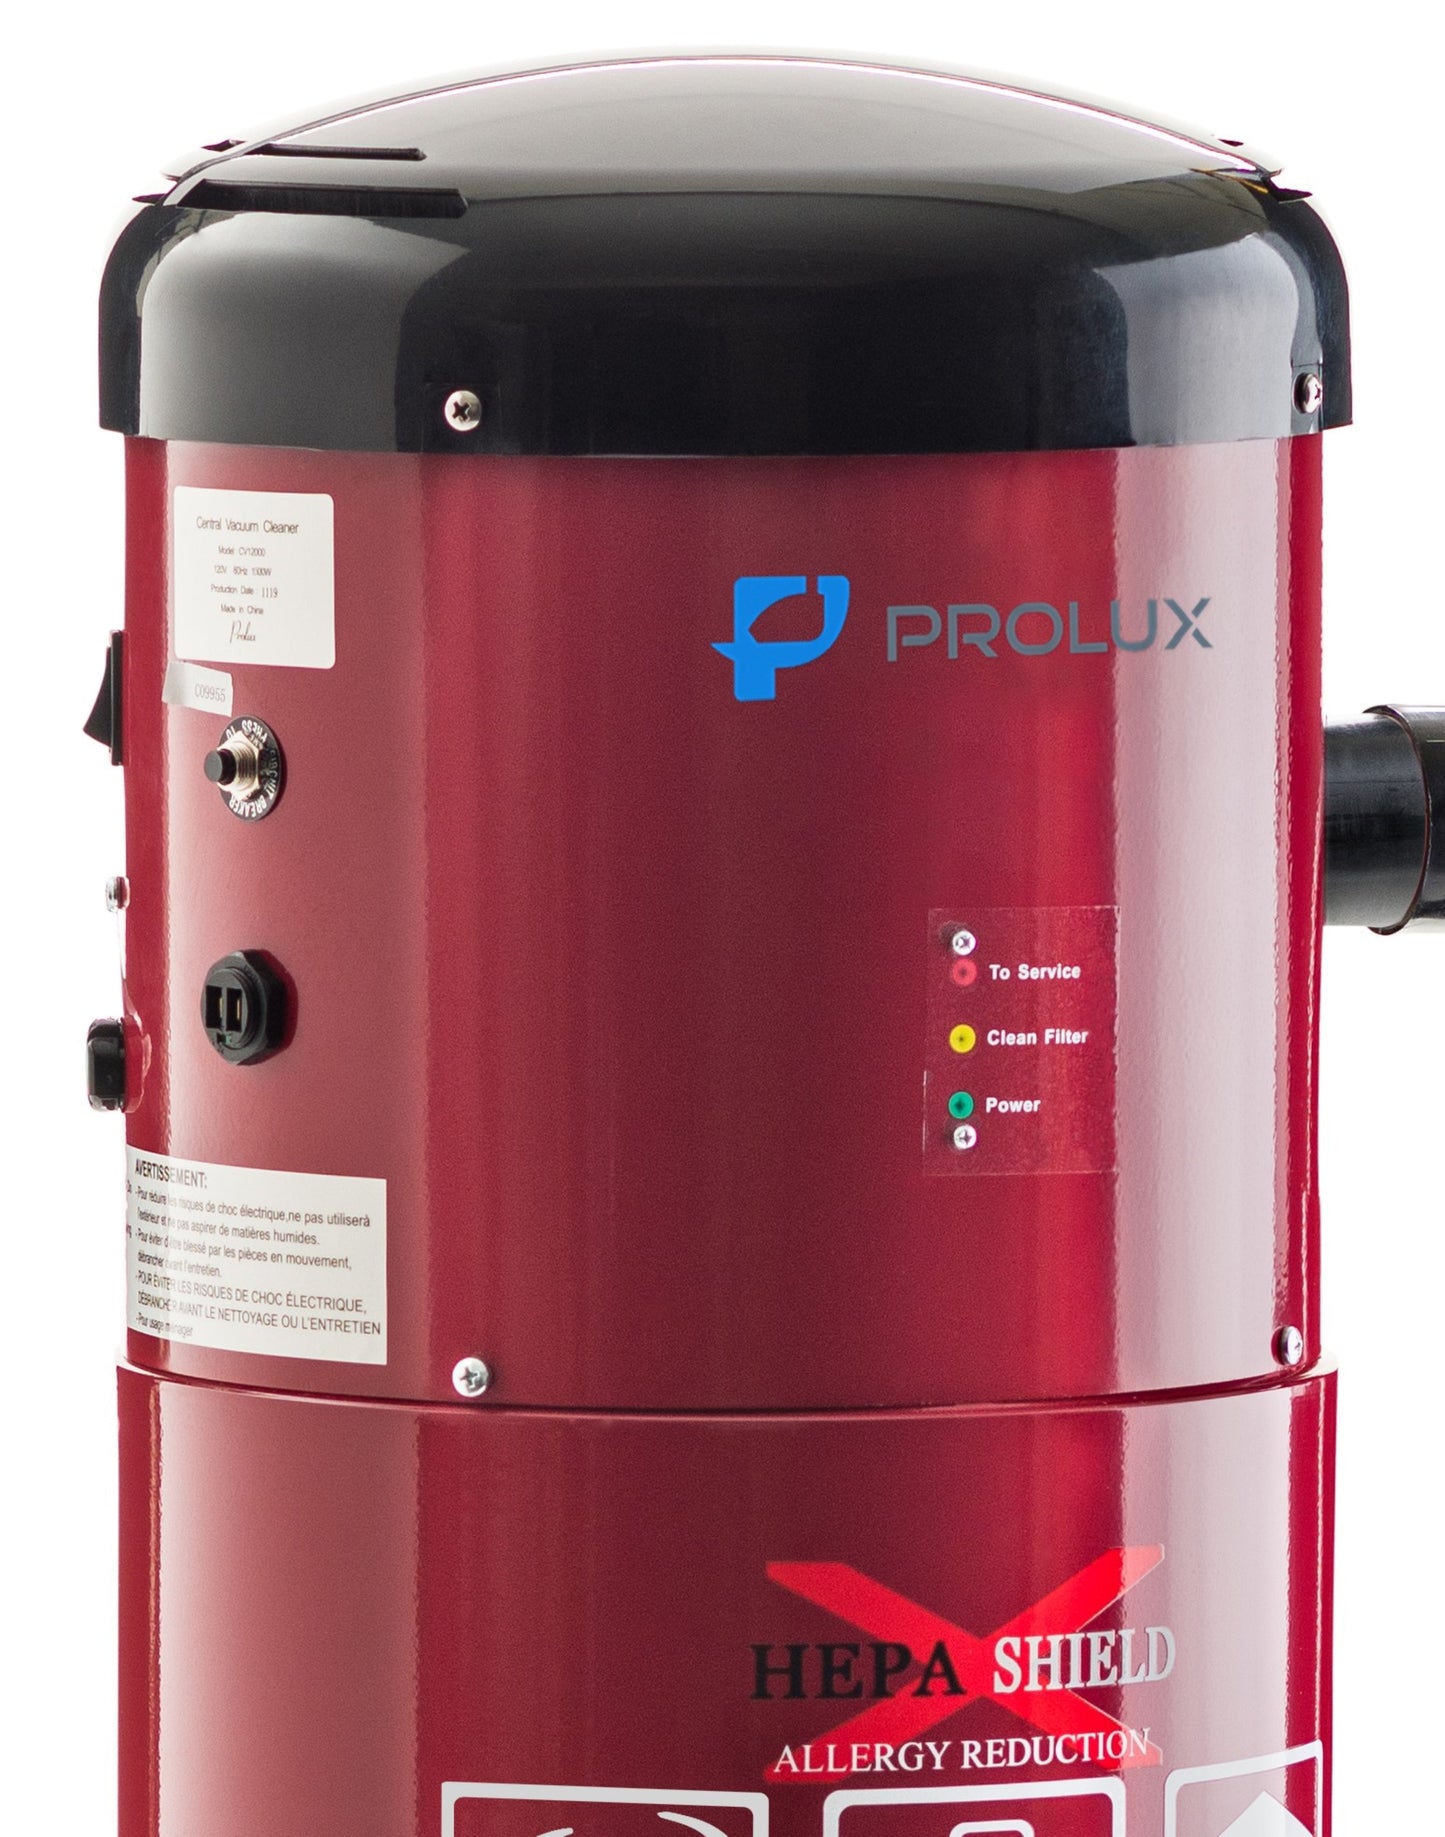 Prolux CV12000 Central Vacuum Unit System with Prolux Electric Hose Power Nozzle Kit and 25 Year Warranty